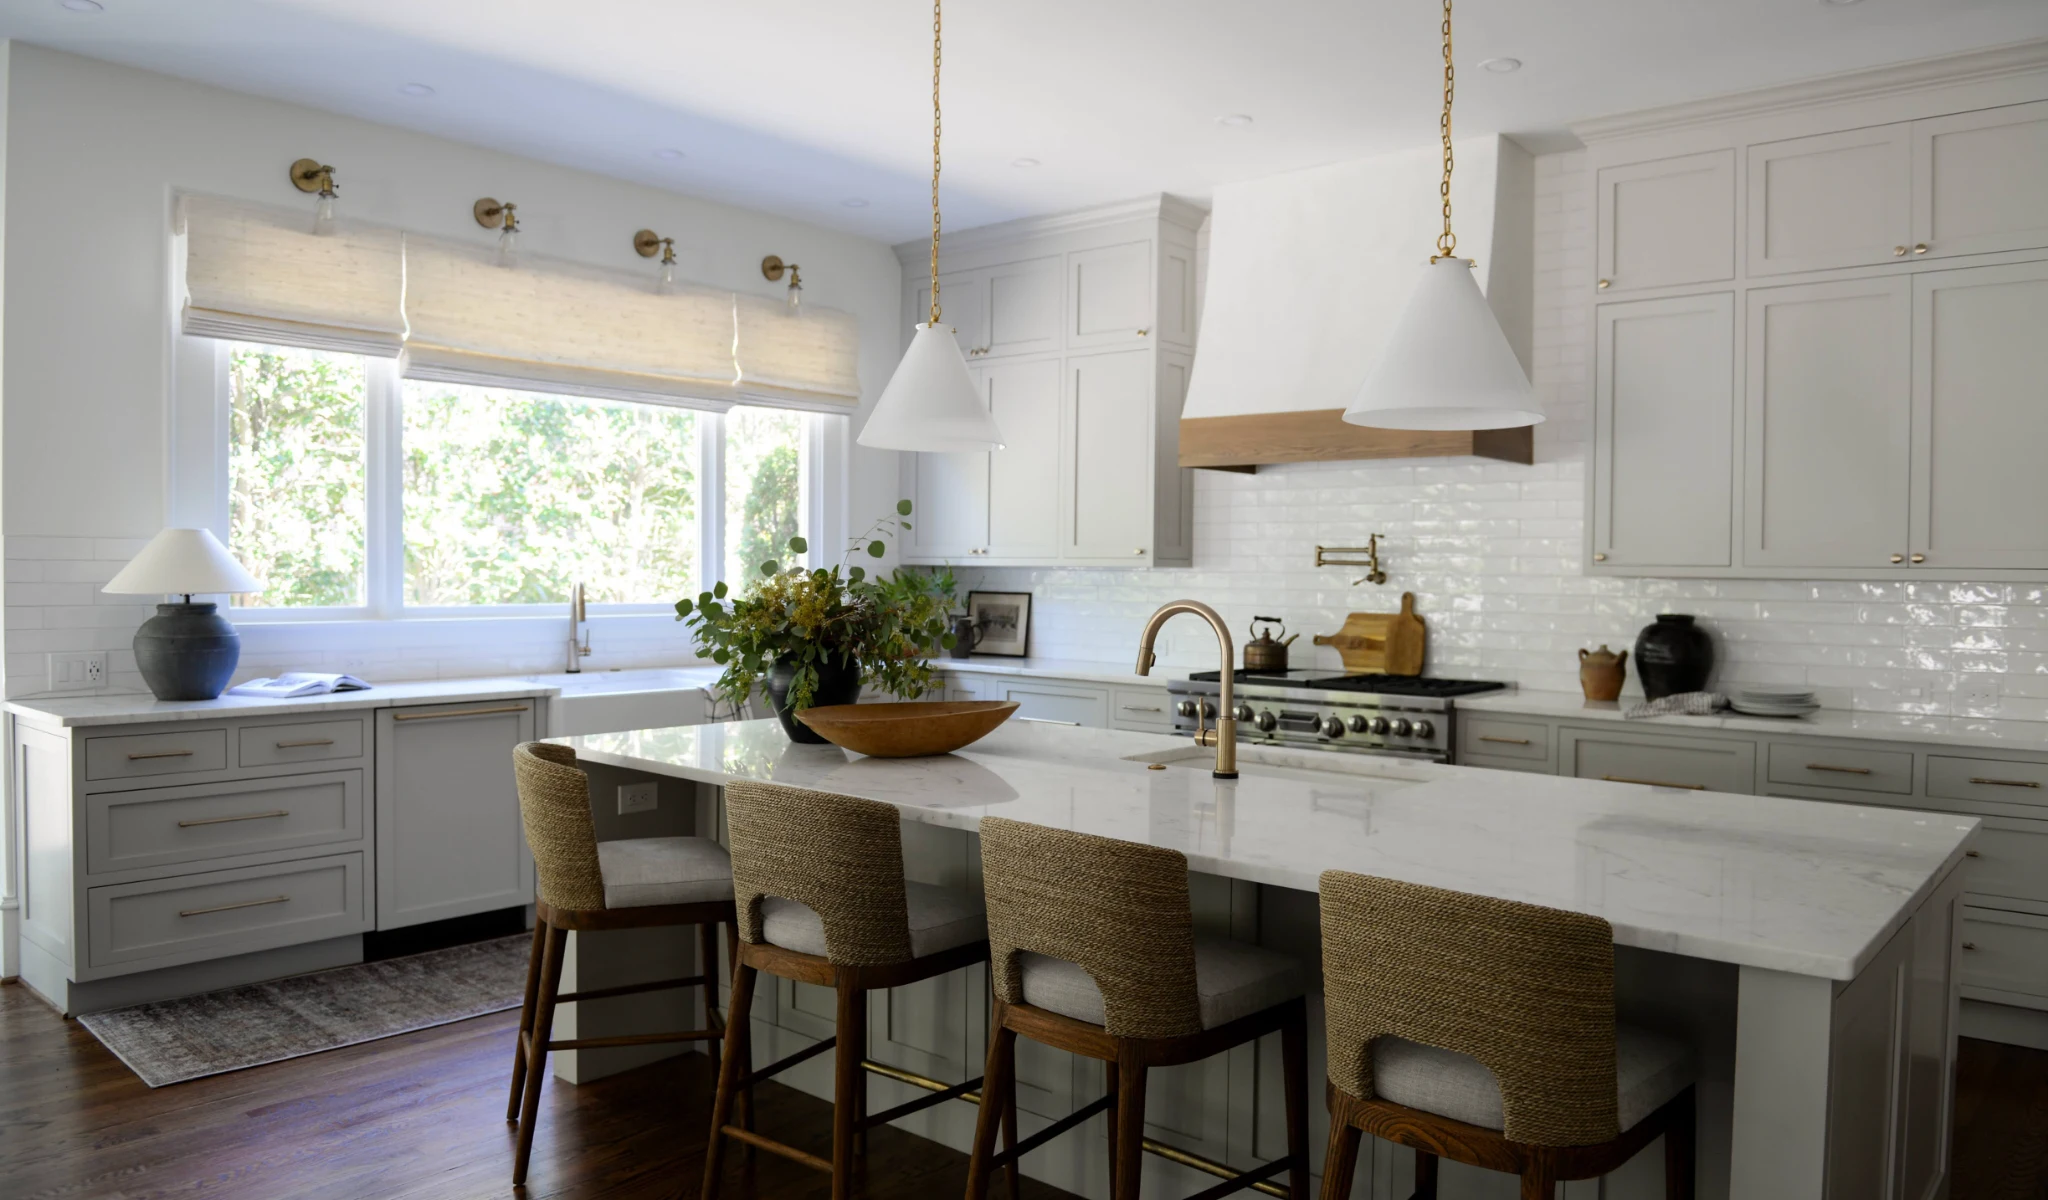 A white kitchen with a center island and bar stools.